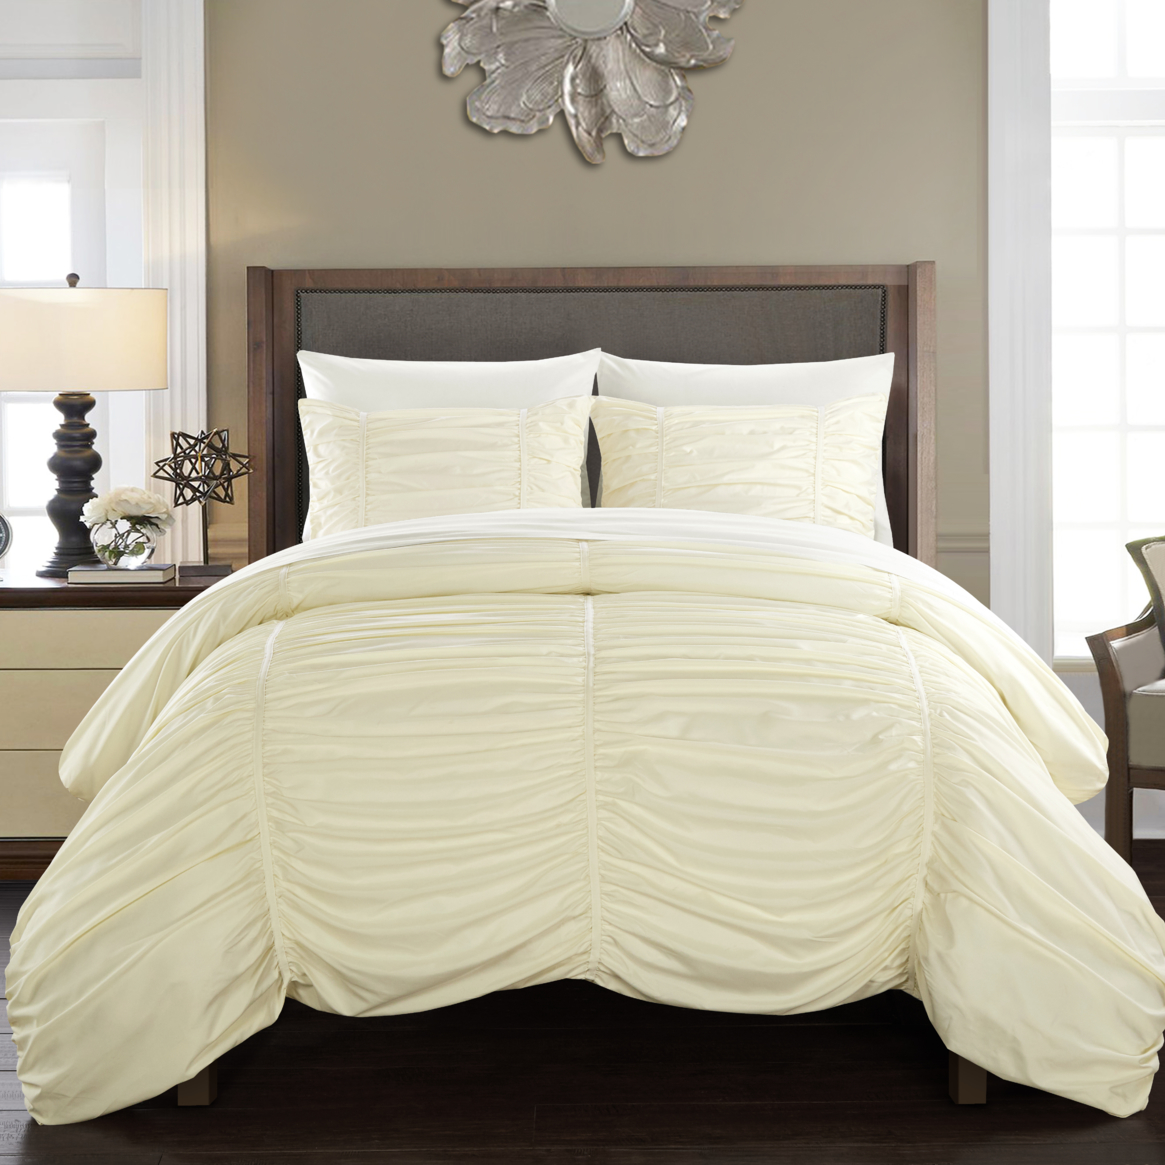 Kleia 7 Or 5 Piece Comforter Set Contemporary Striped Ruched Ruffled Design Bed In A Bag - Beige, Twin